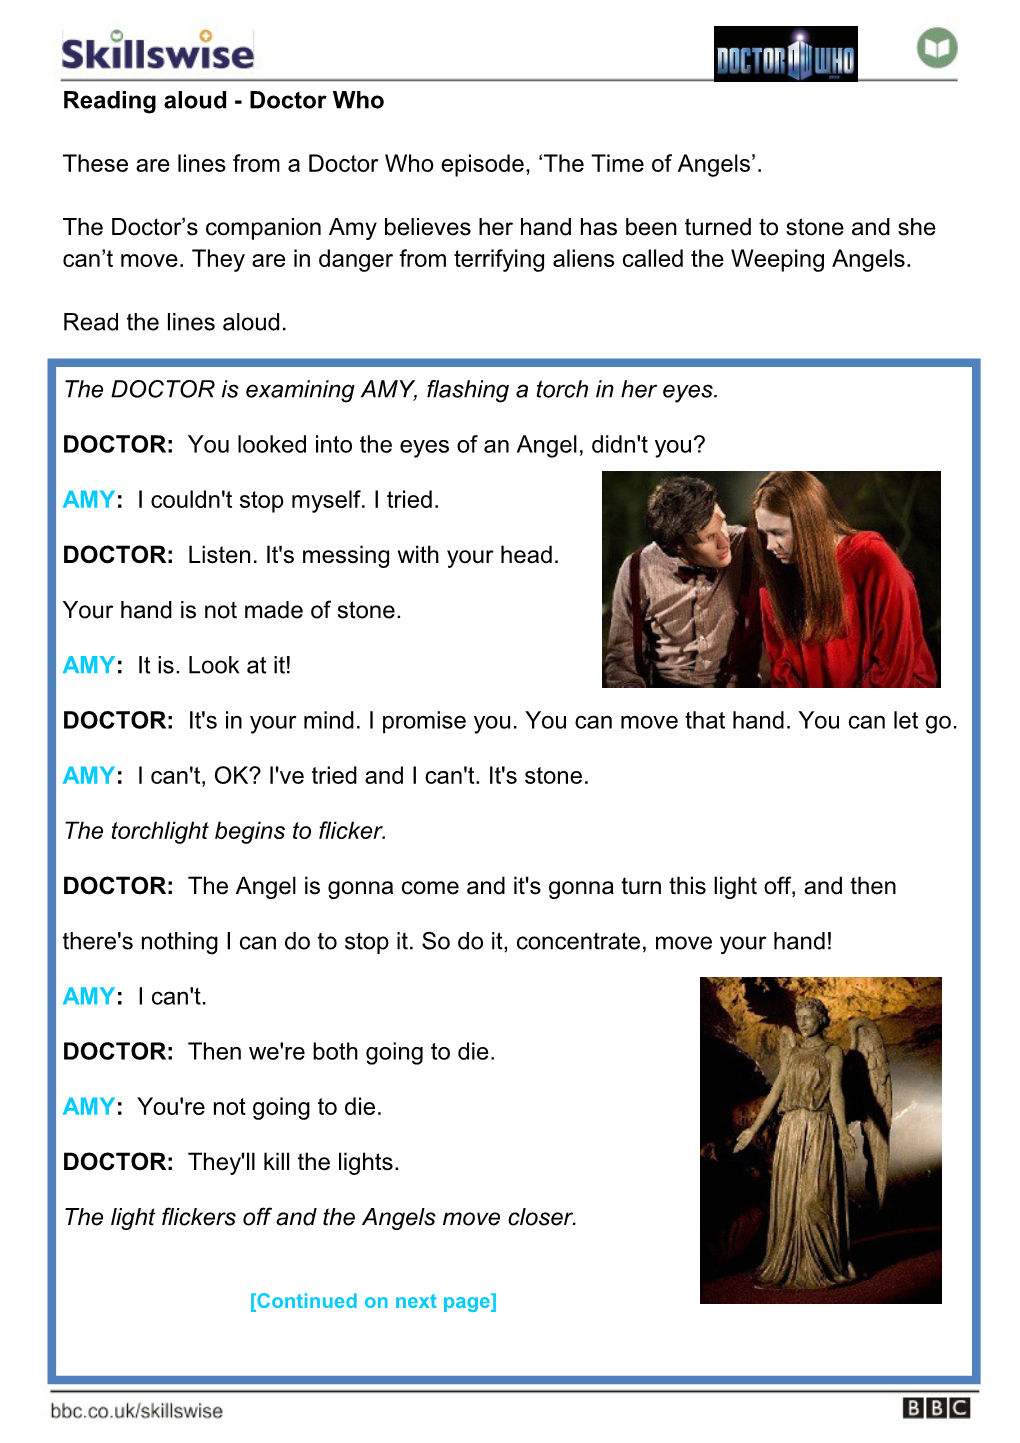 Reading Aloud - Doctor Who